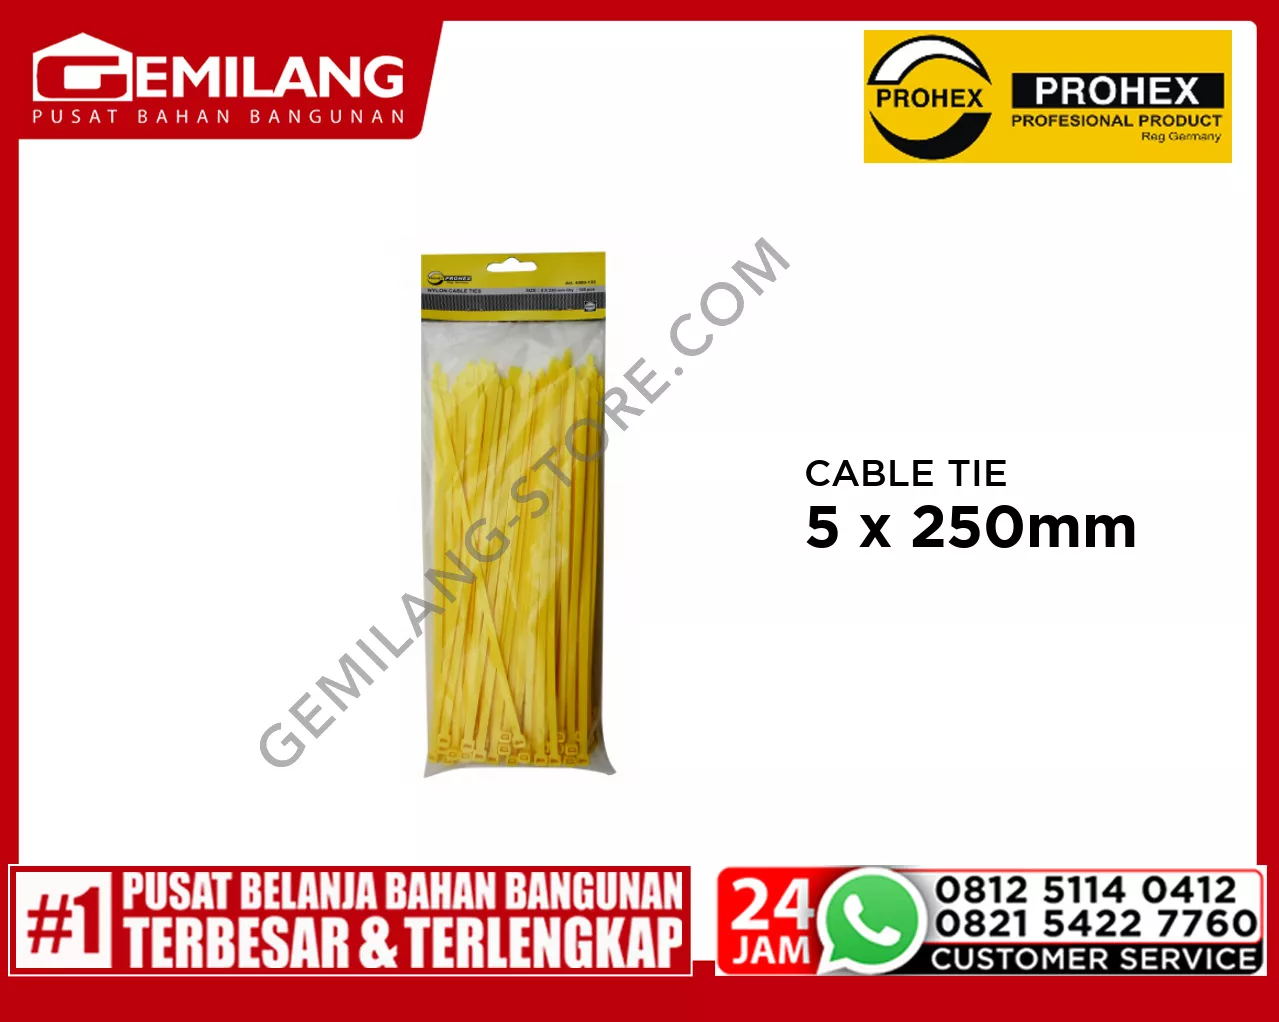 PROHEX CABLE TIE KUNING 5 x 250mm 100pc (4580-133)